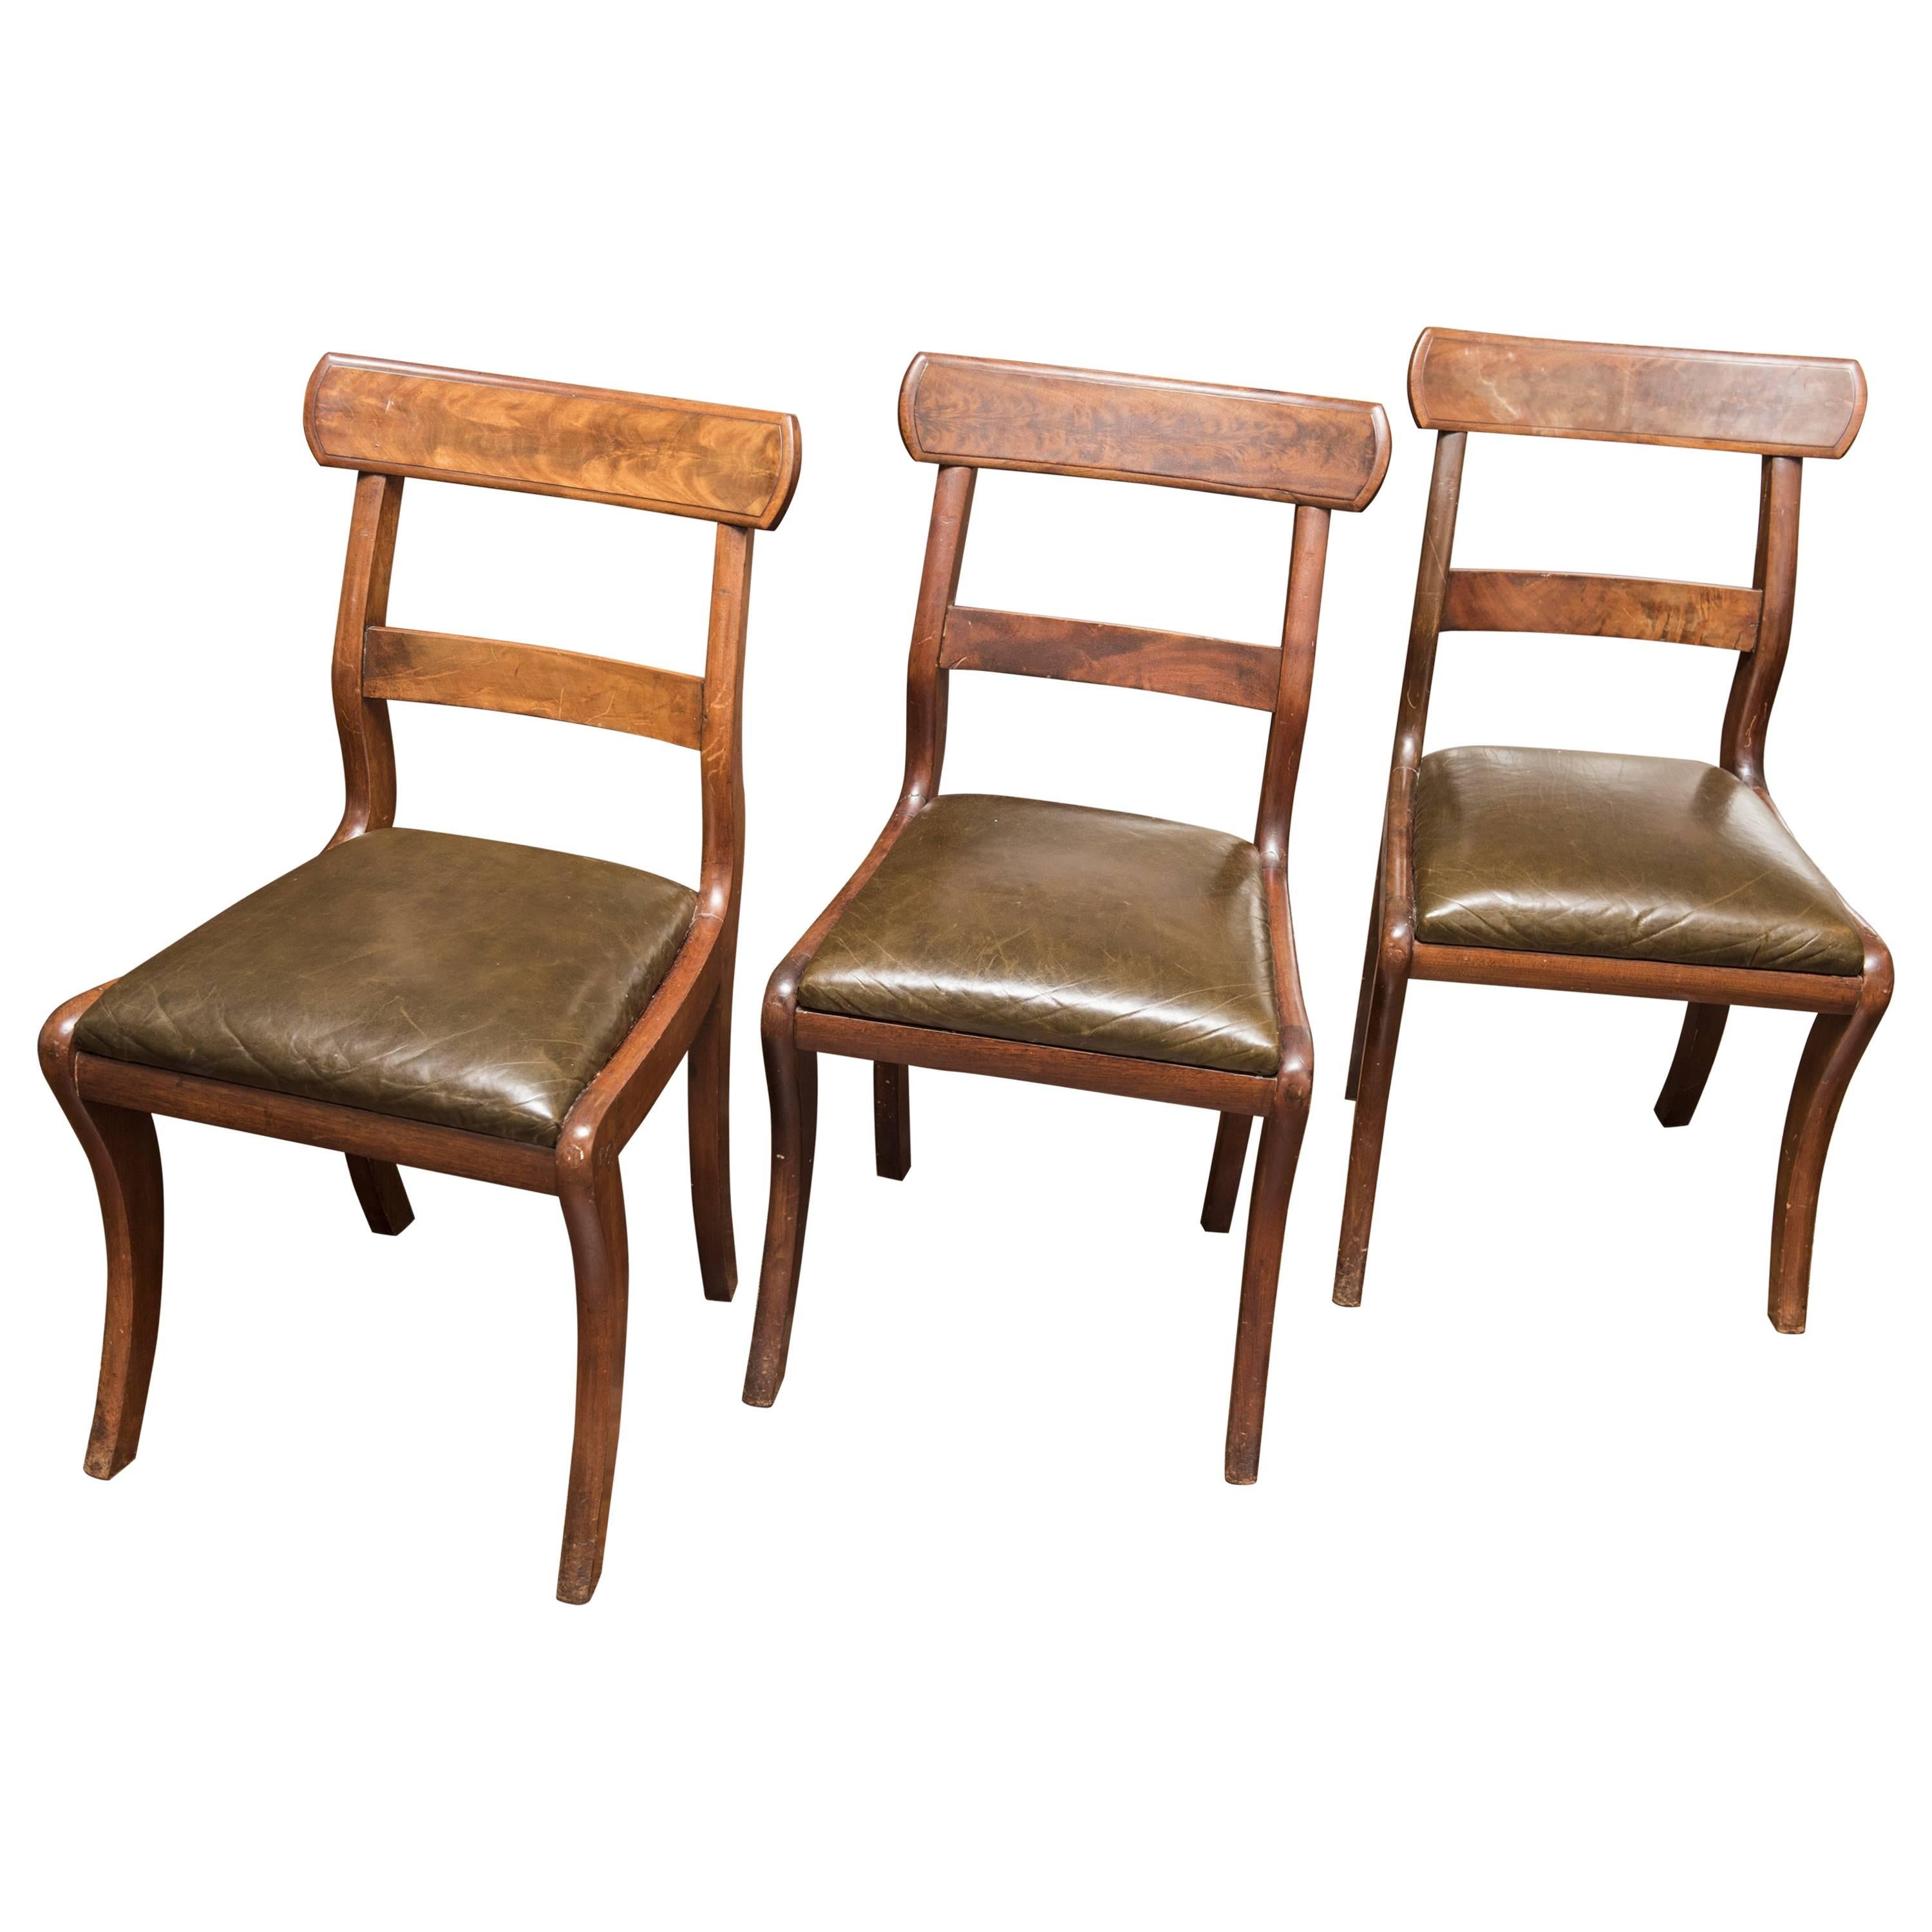 Three English Chairs For Sale